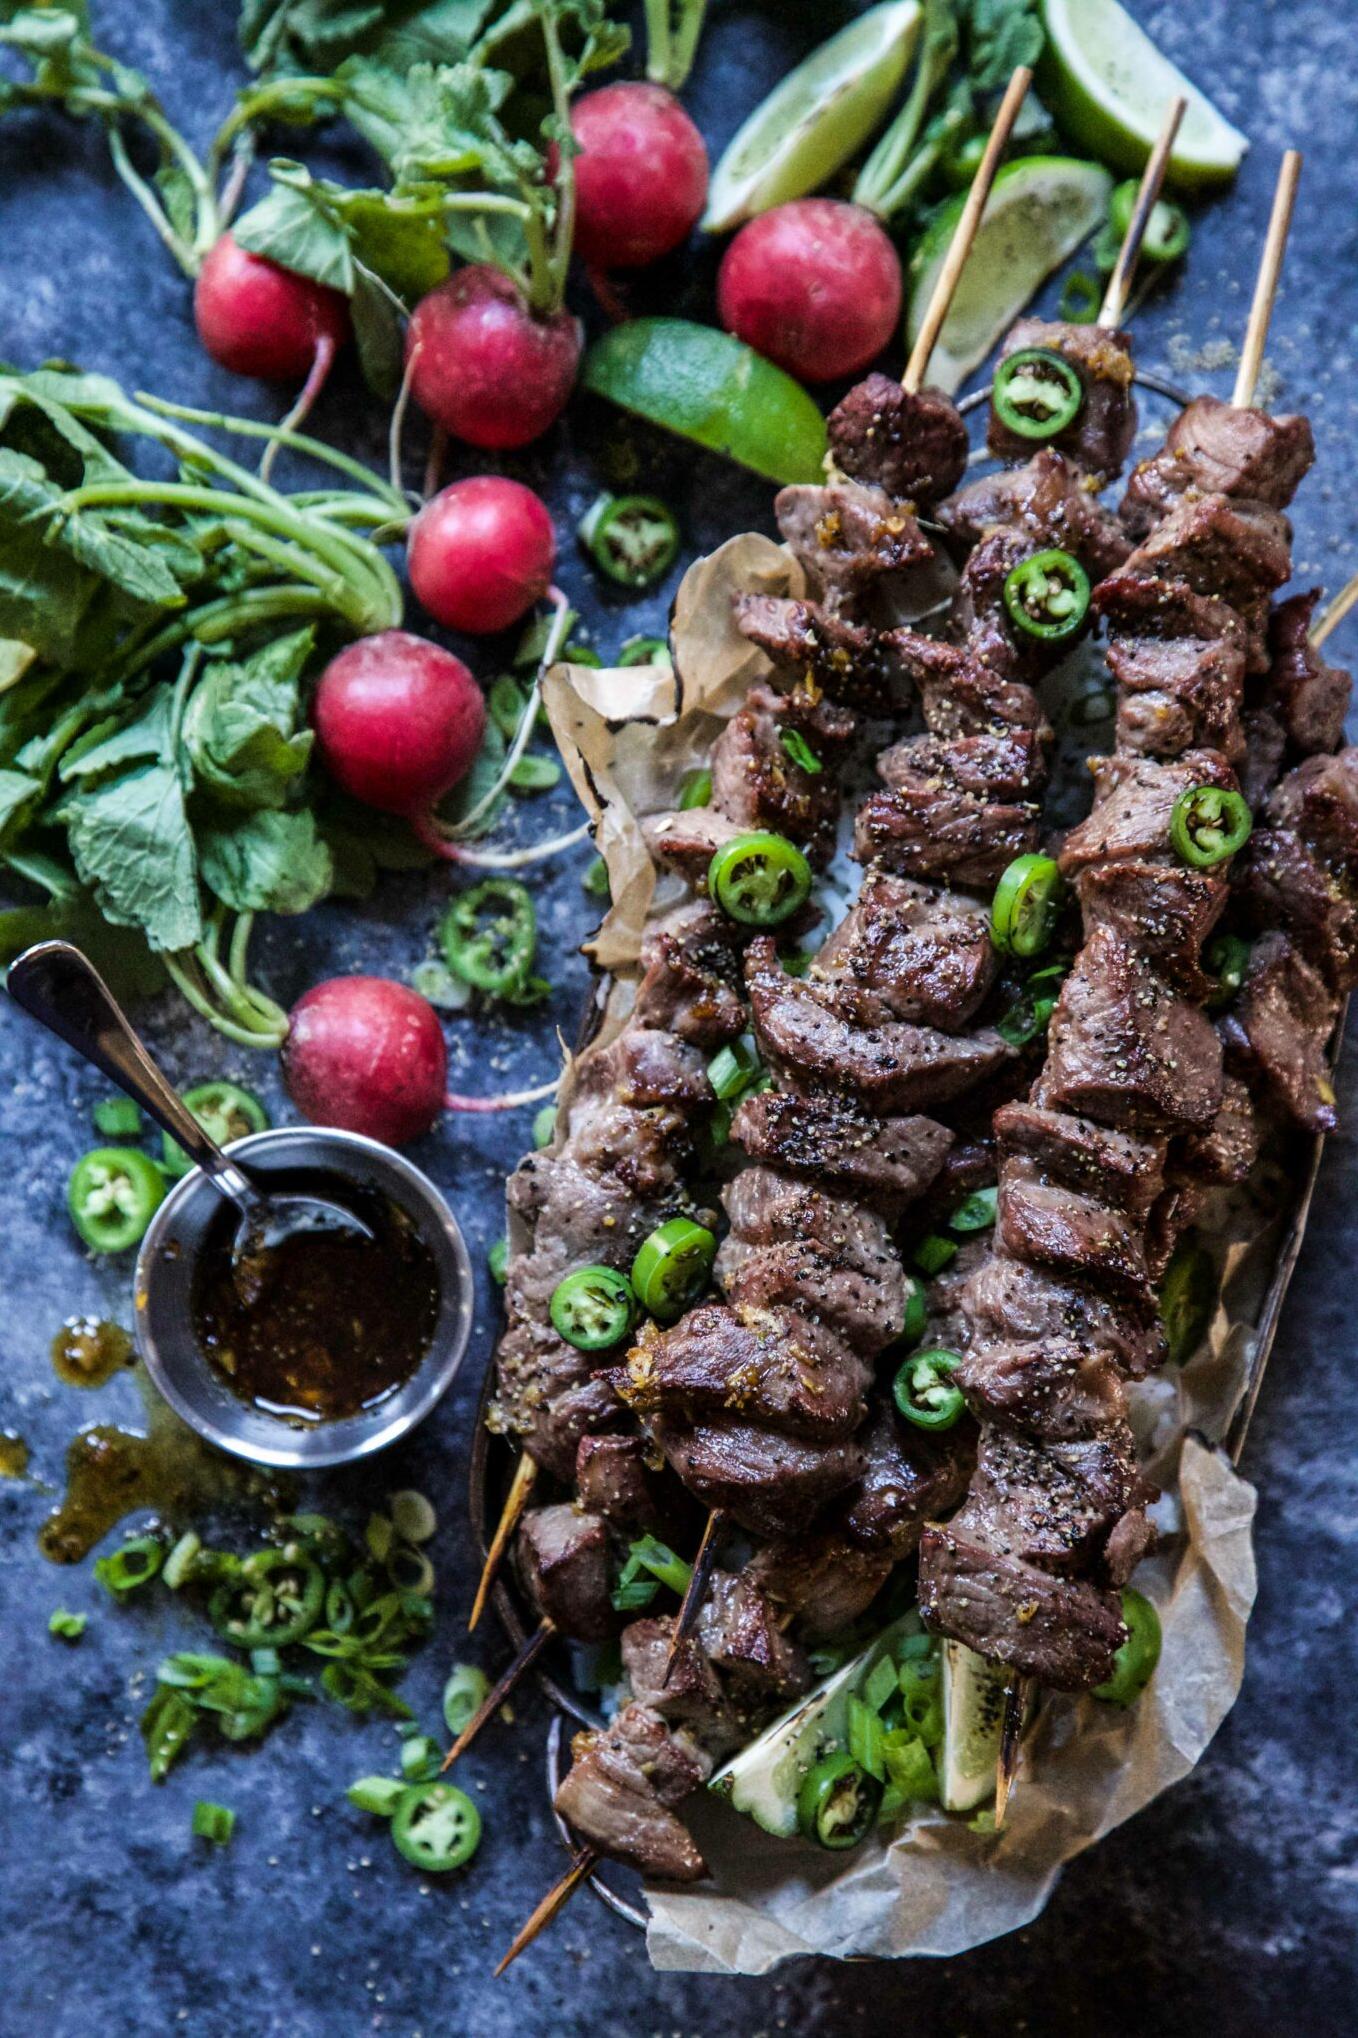  Warning: these skewers are addictive and will disappear fast!